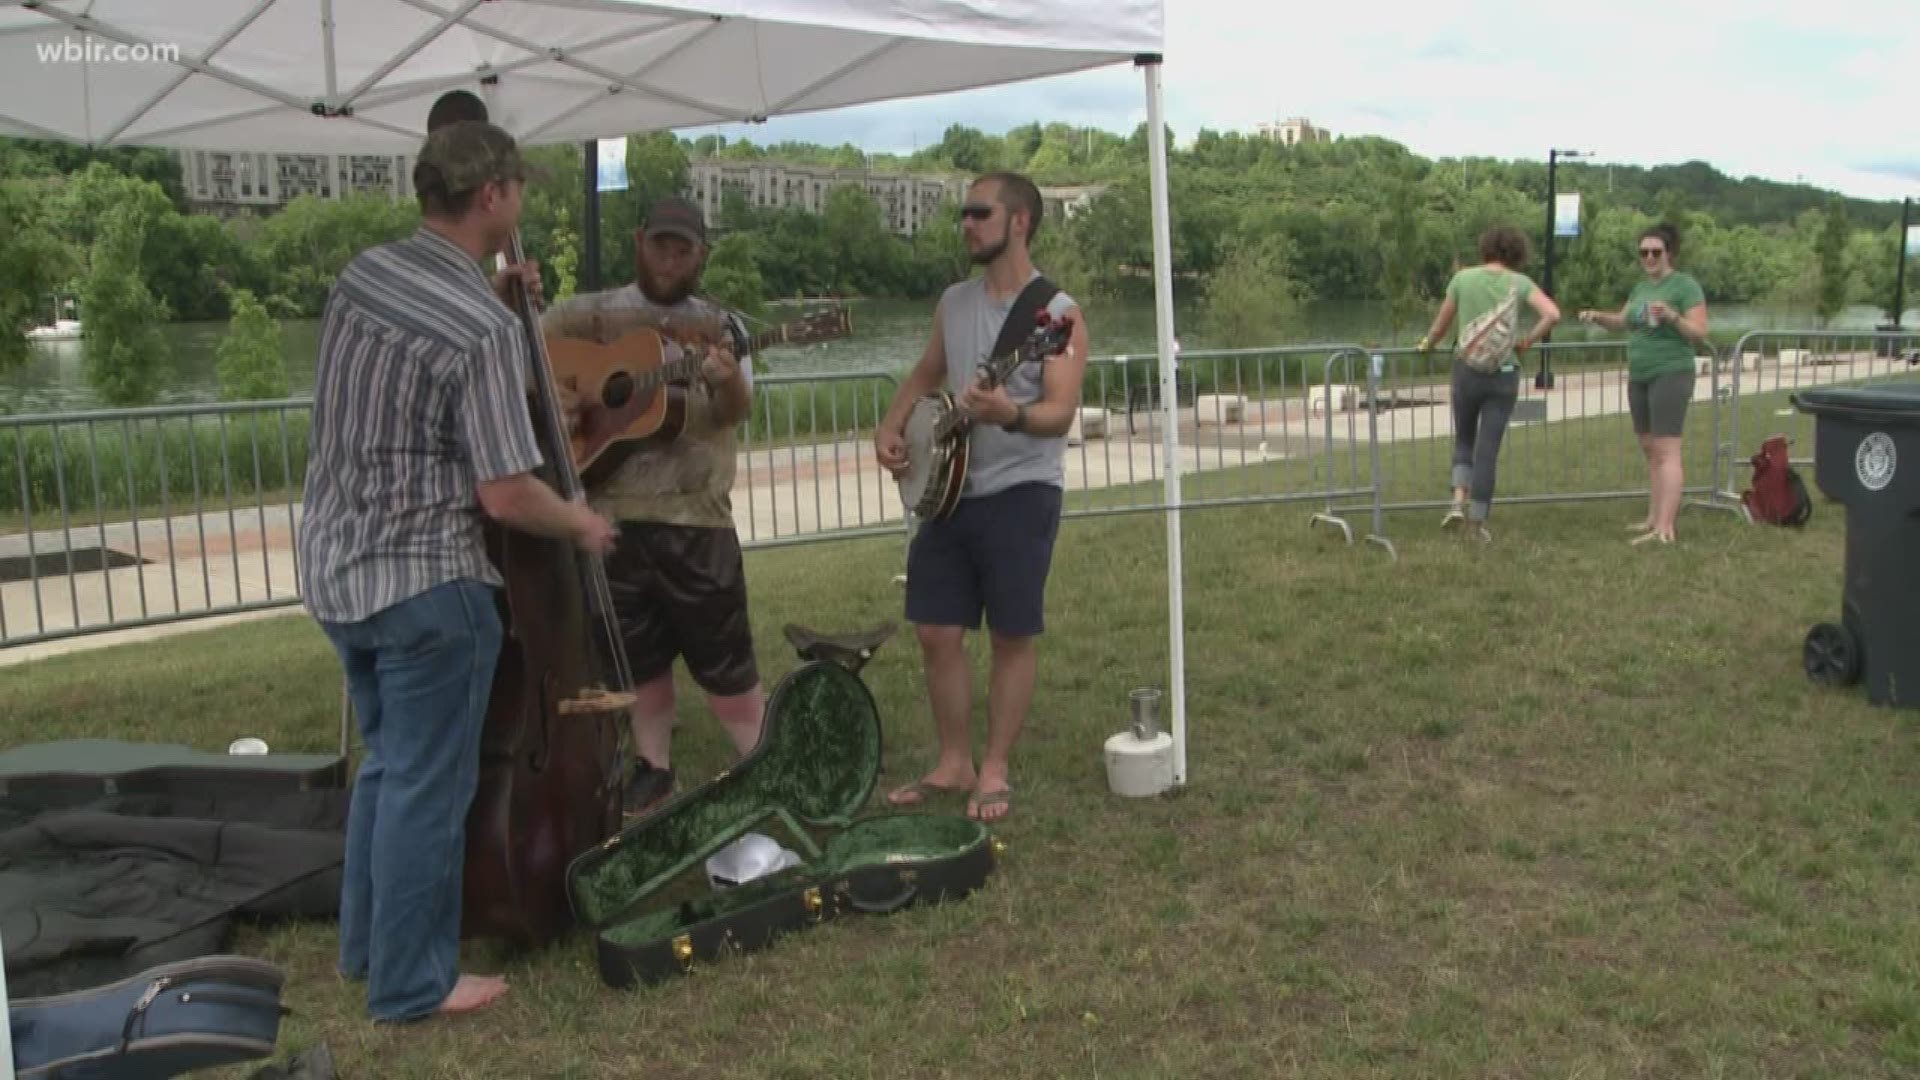 Music, games and river sports took over the Tennessee riverfront for the third annual Cheers to Clean Water event.